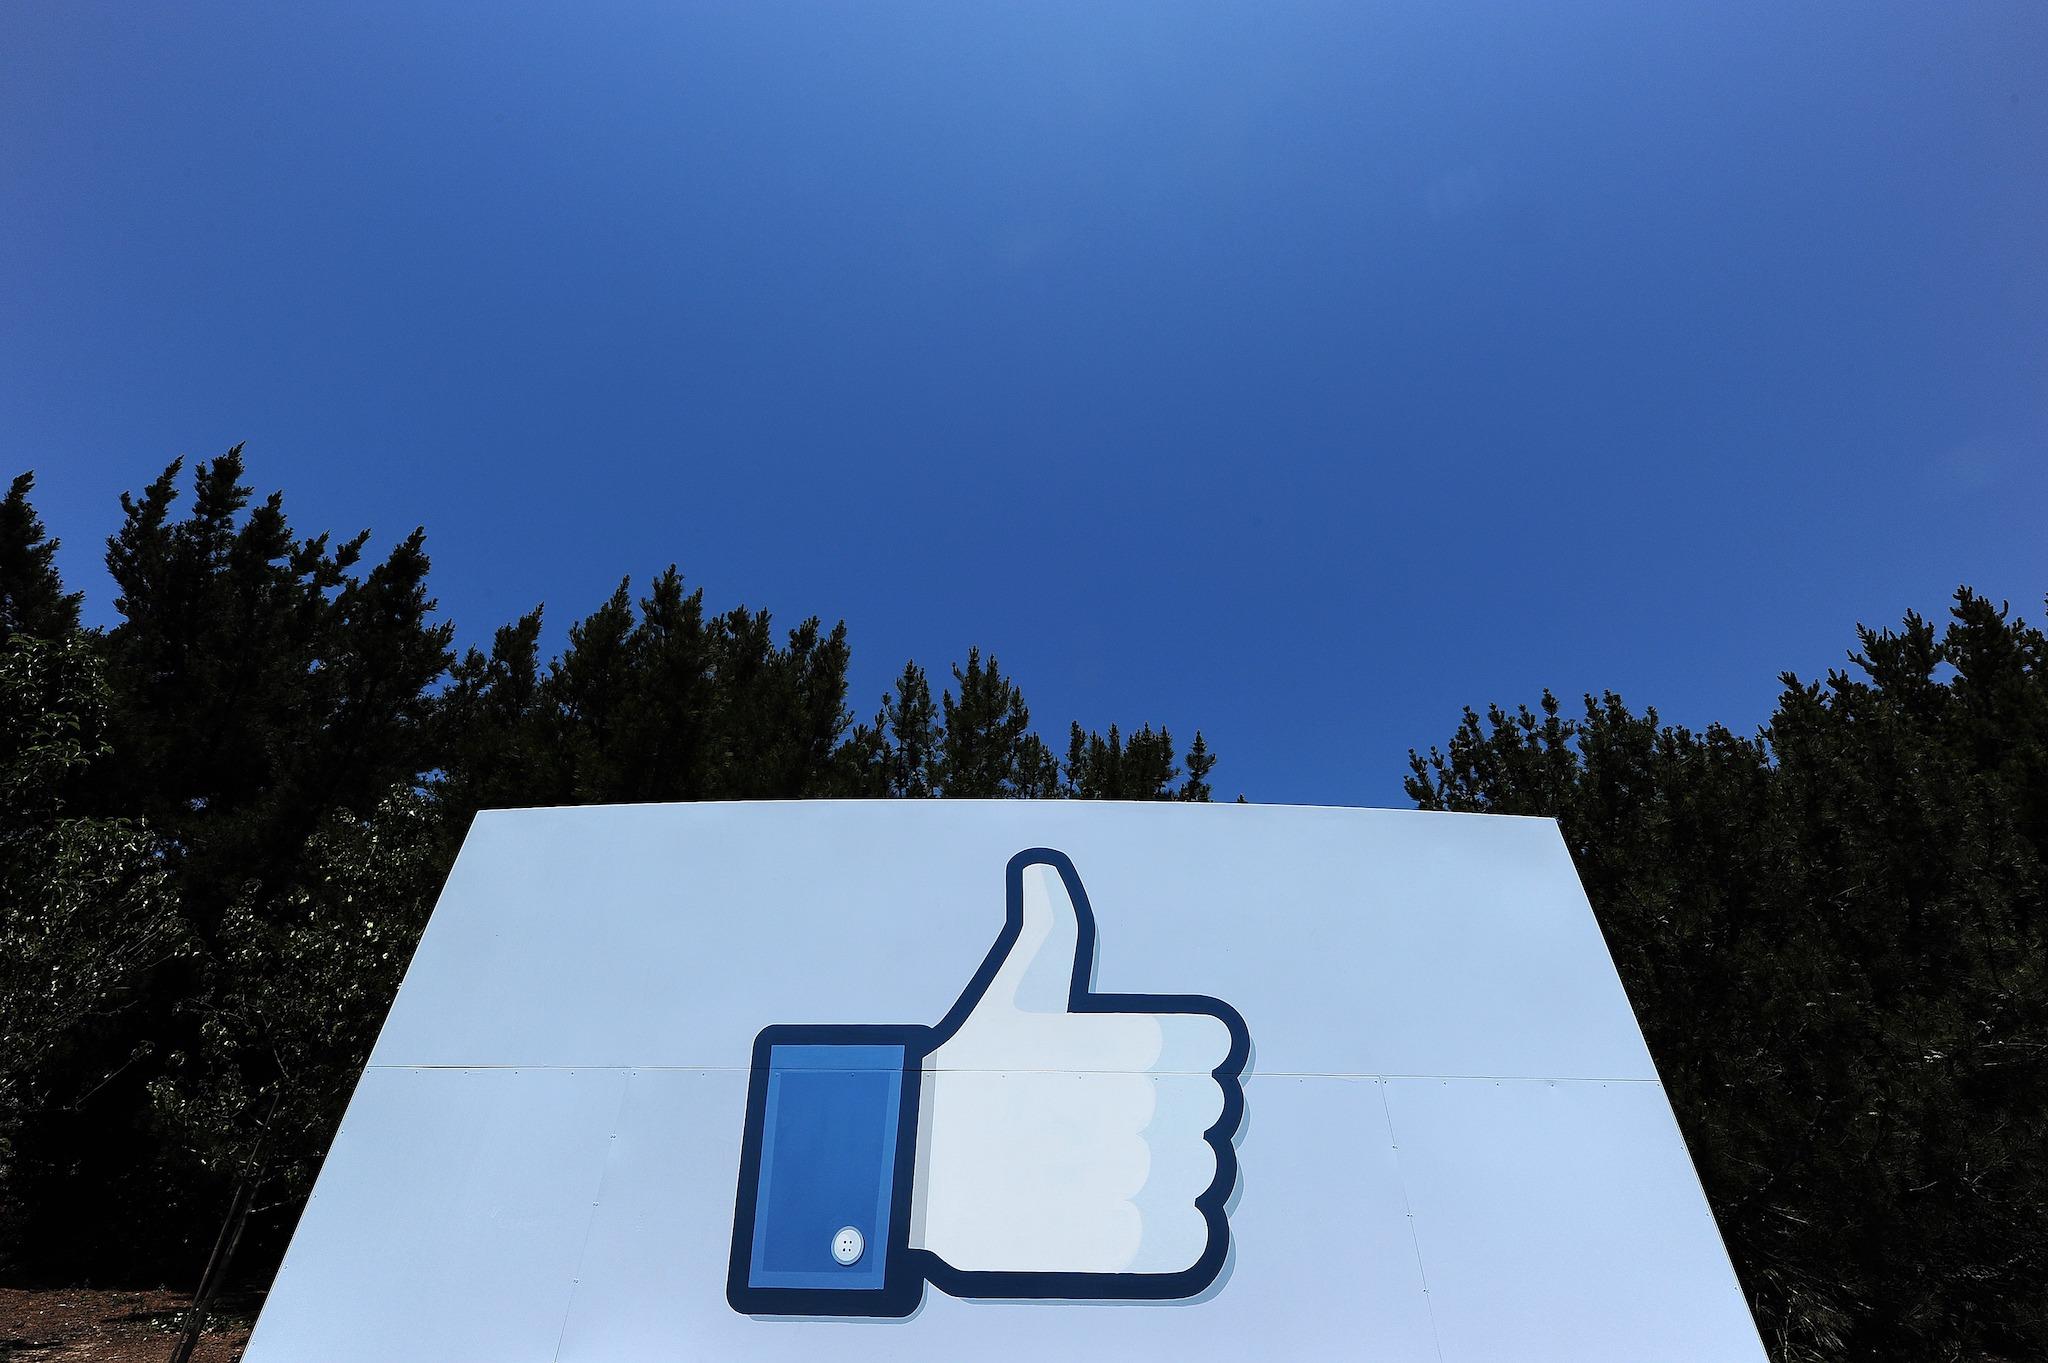 A thumbs up or "Like" icon at the Facebook main campus in Menlo Park, California, May 15, 2012